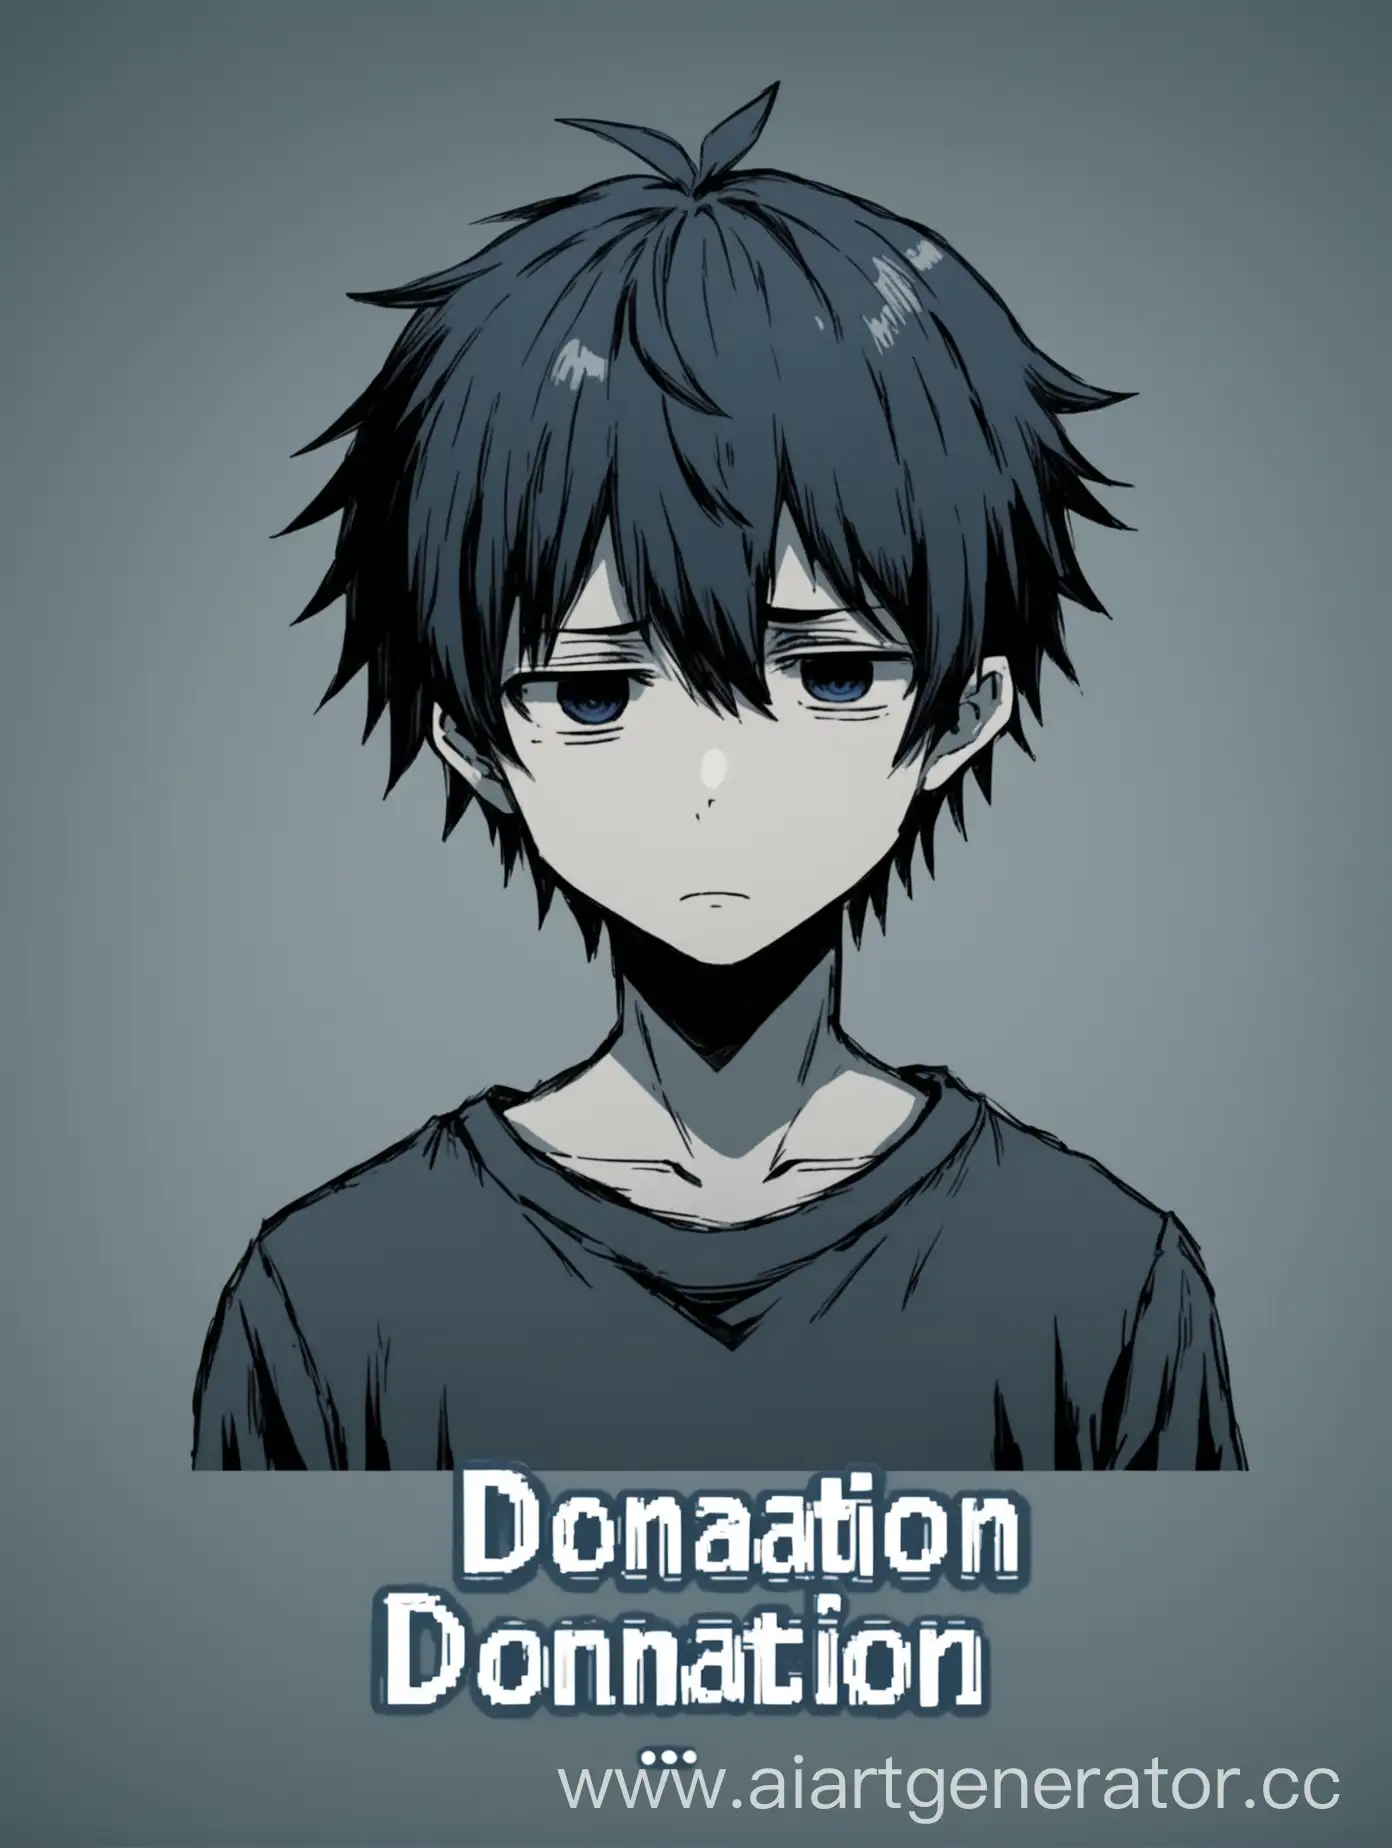 Depressed-Anime-Boy-with-Donation-Button-Comic-Book-Style-Art